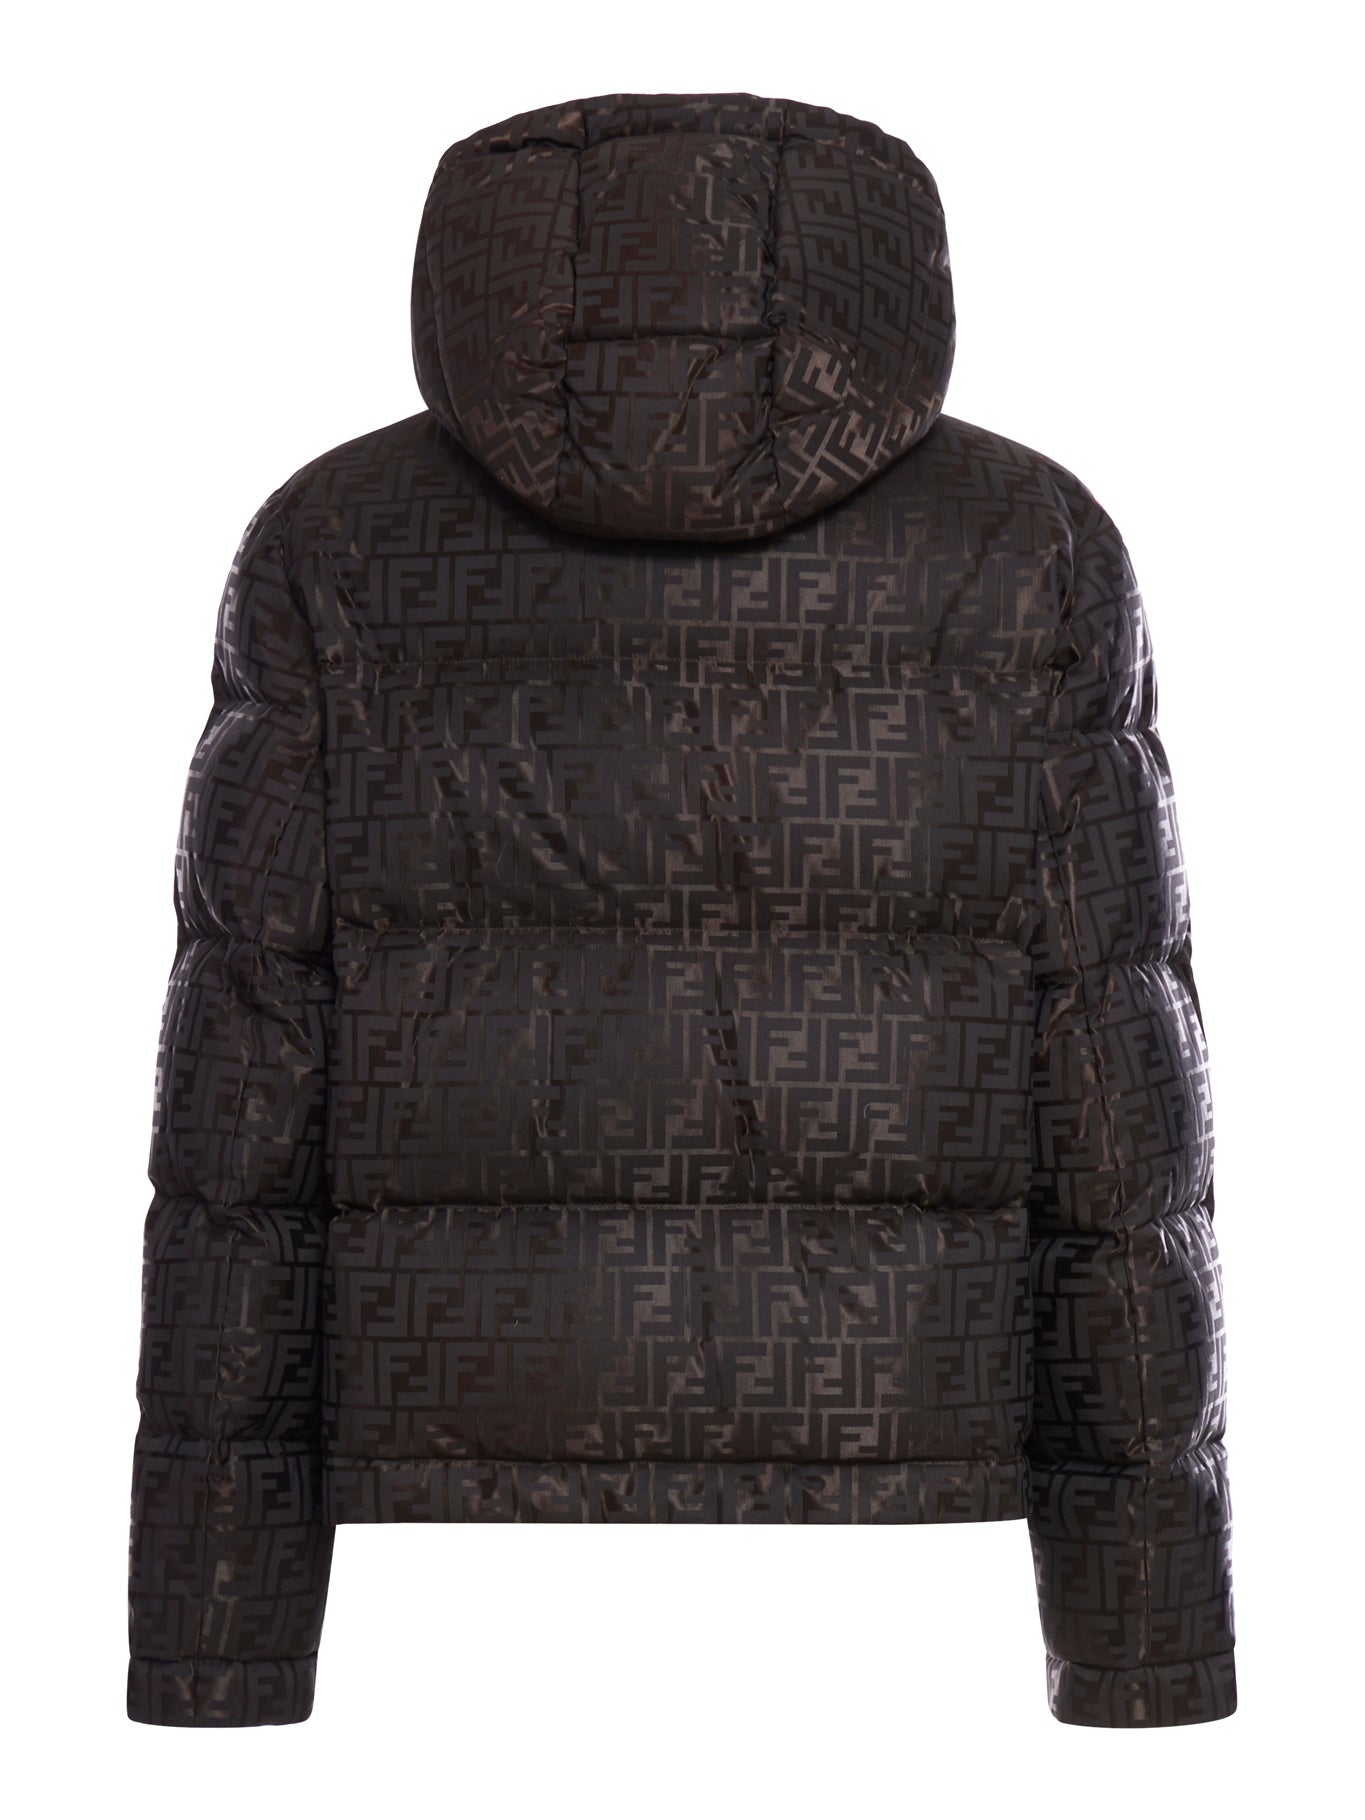 Down jacket in brown technical fabric